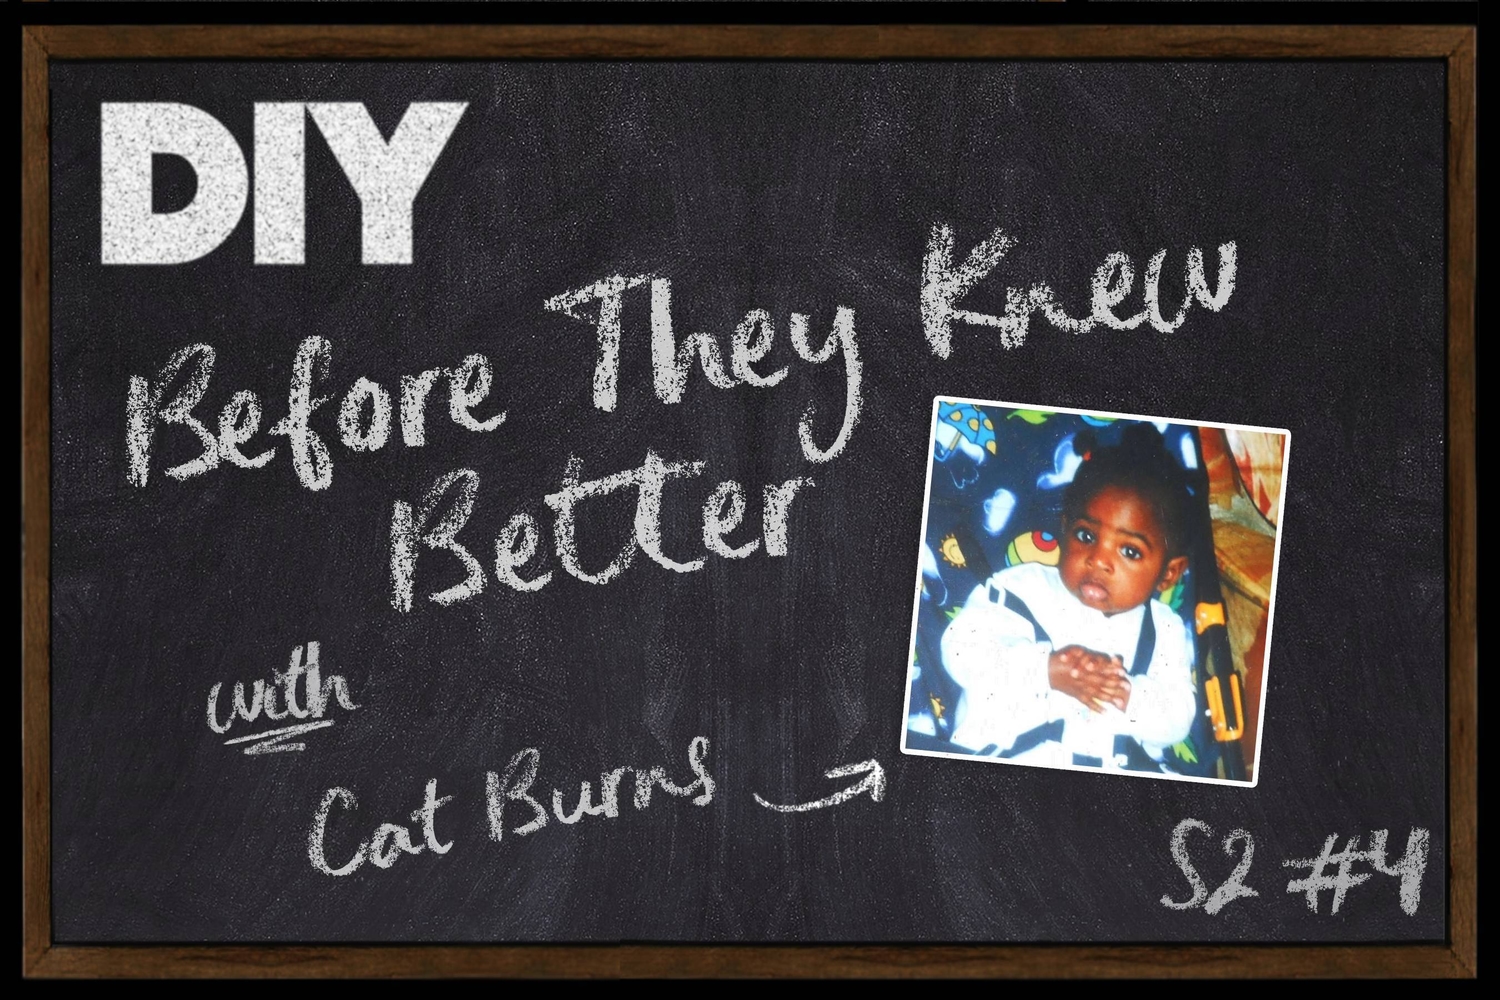 Cat Burns chats Ed Sheeran, sisterhood, and living with autism on DIY magazine’s Before They Knew Better podcast